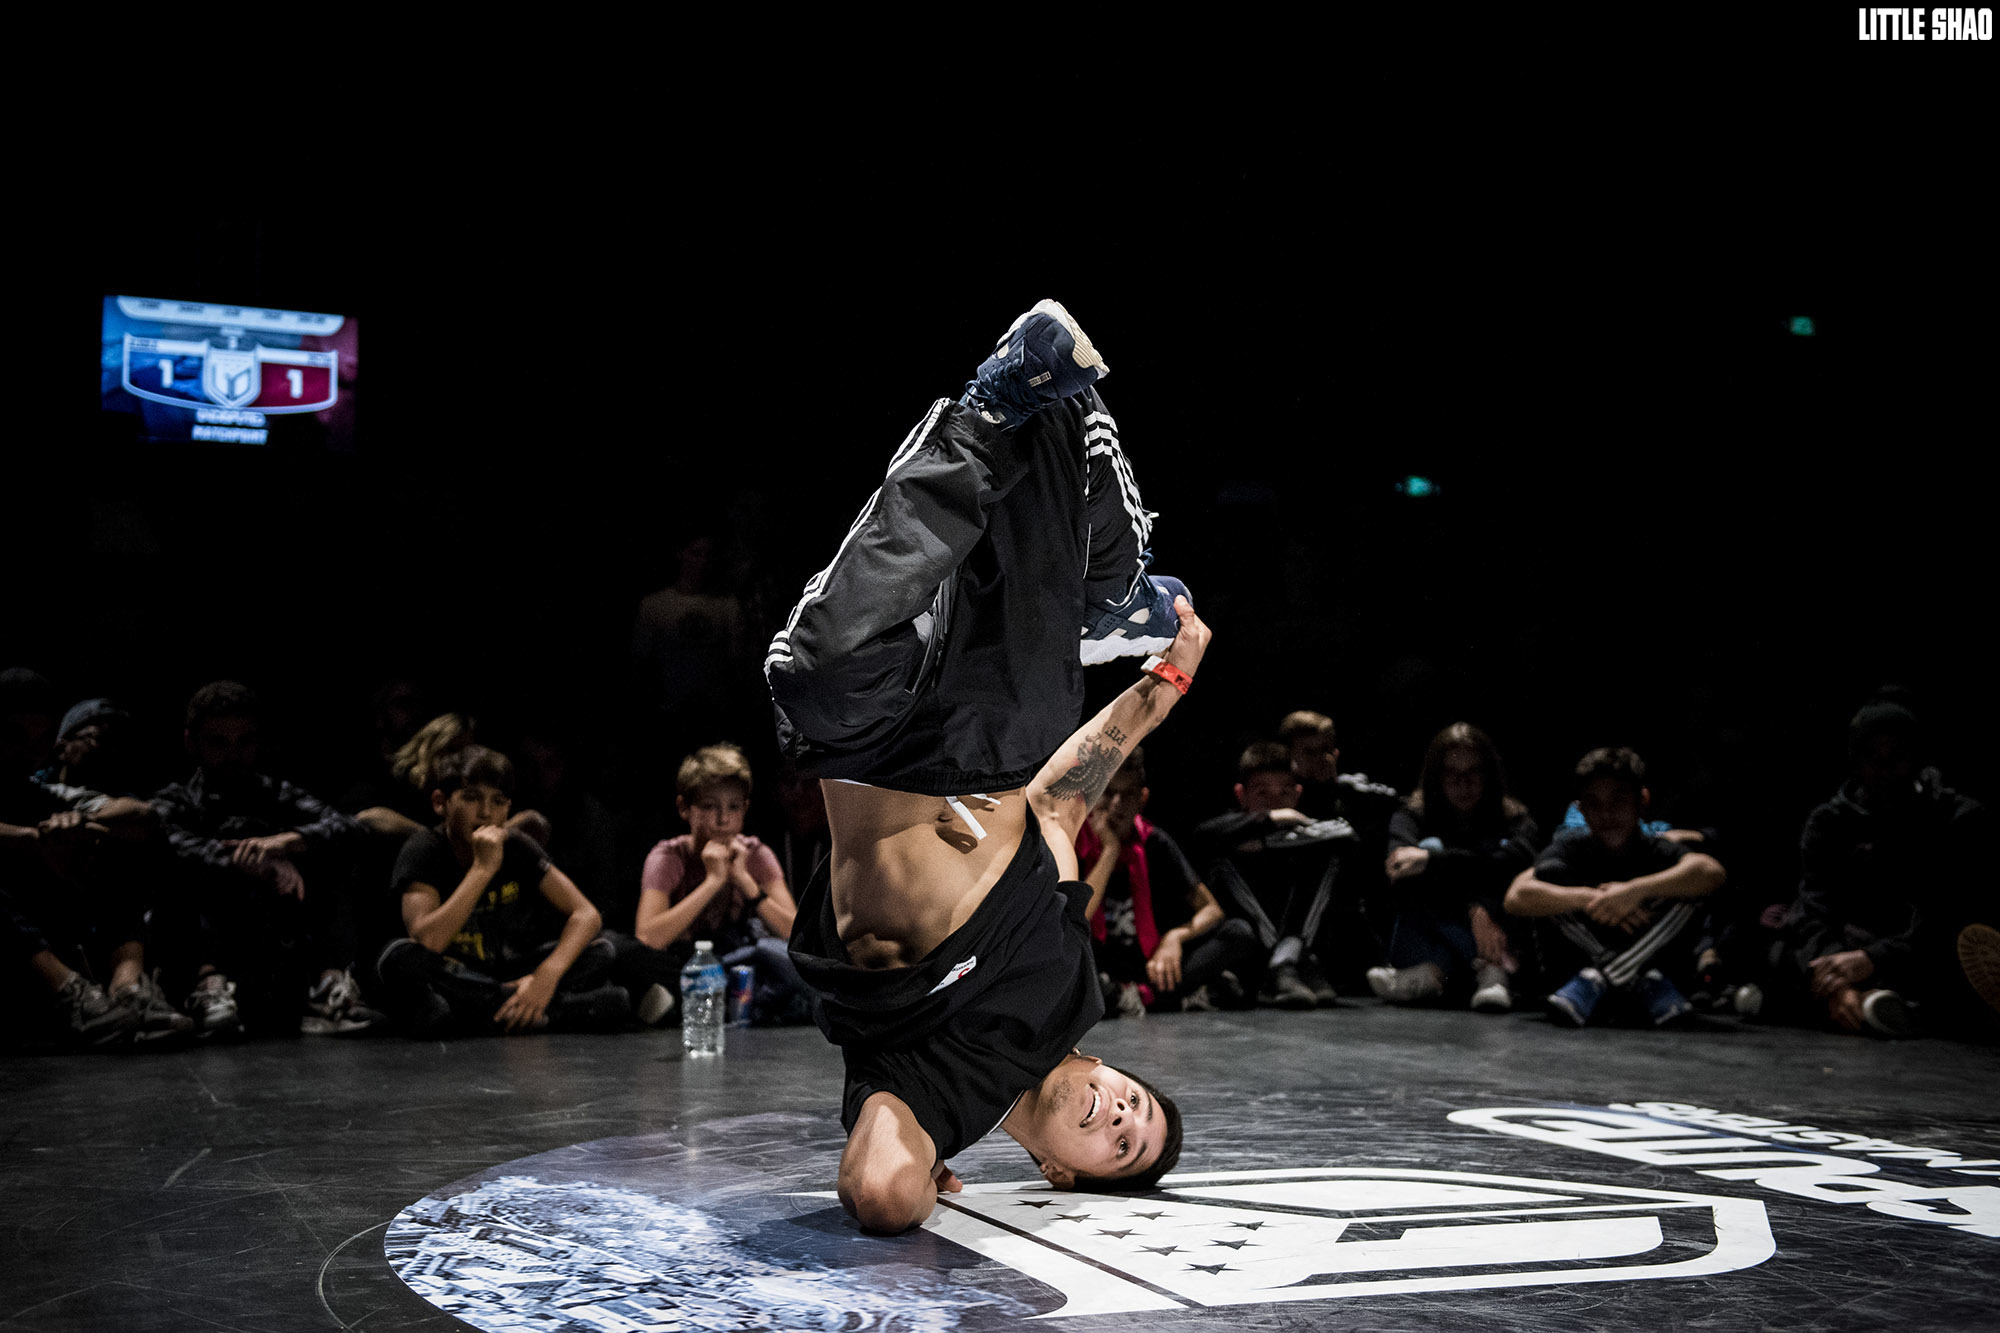 IBE 2014 | UK Champs Bboy Crew Final | The Ruggeds vs. Styles Connection -  YouTube